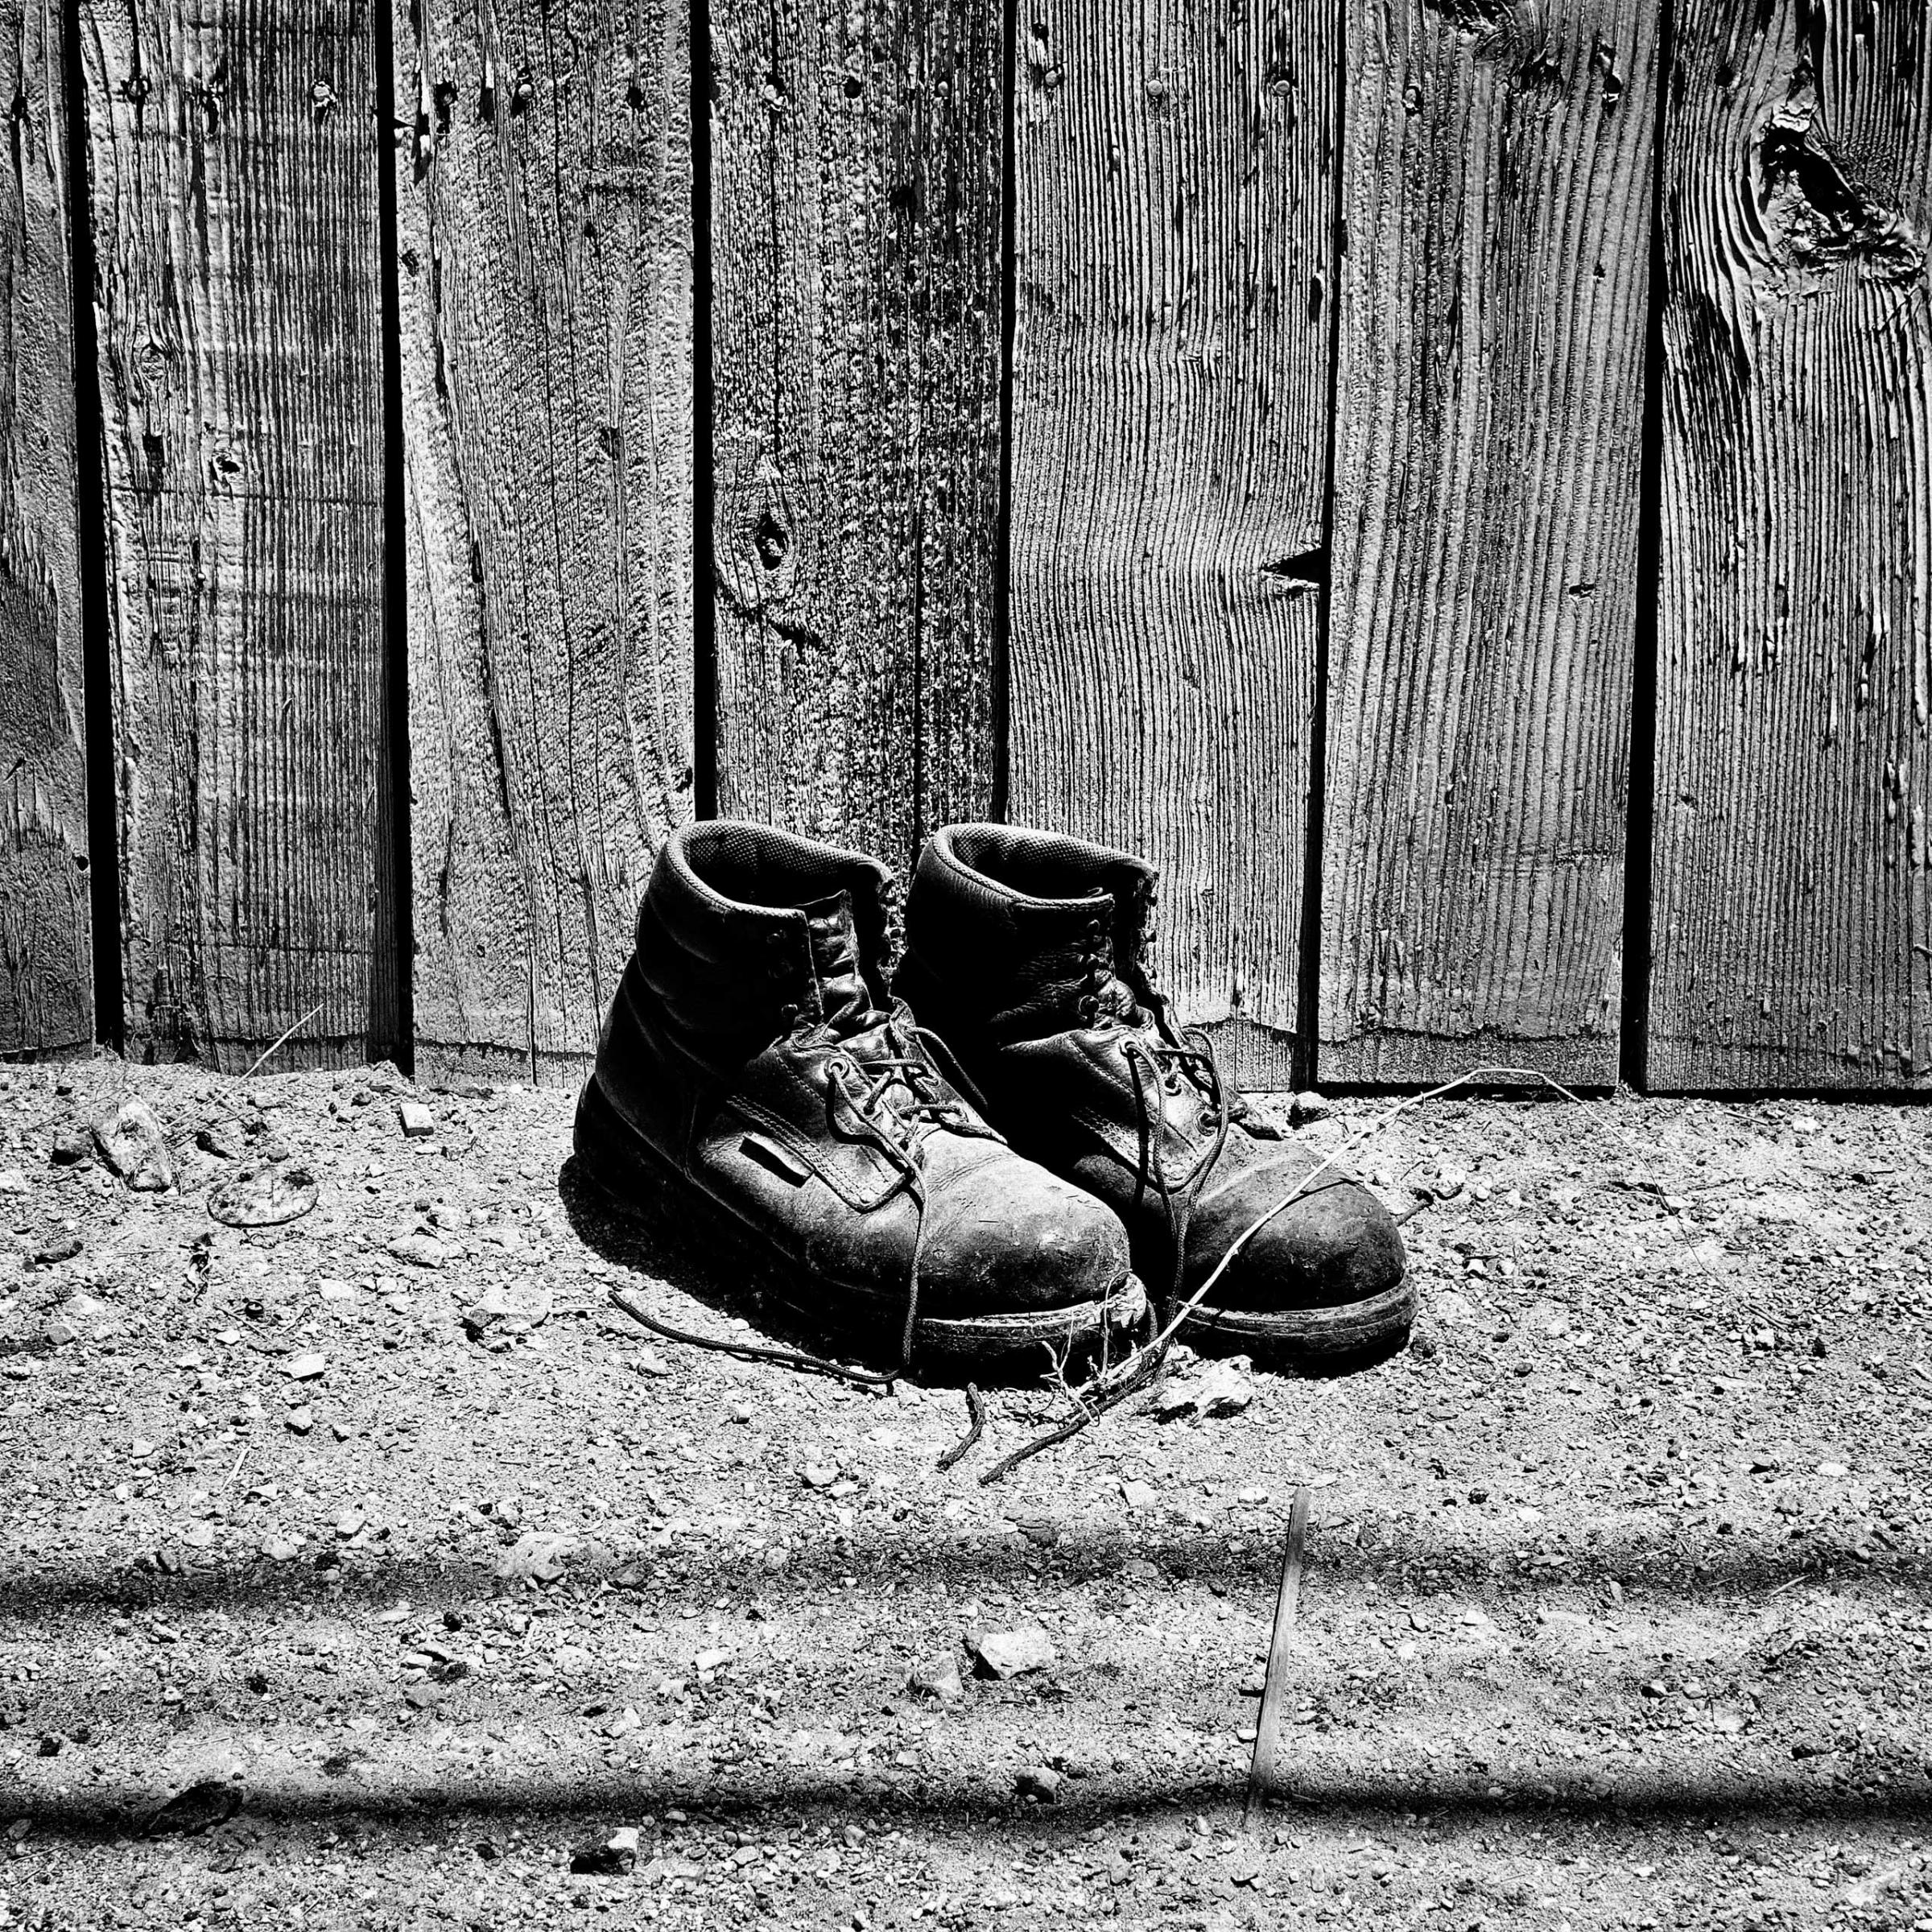 The Geography of Poverty USA - Sunrise Manor, NV.  Boots. Sunrise Manor is an unincorporated community in Clark County, Nevada. The population is 189,372 and 24.1% live below the poverty level. #geographyofpoverty